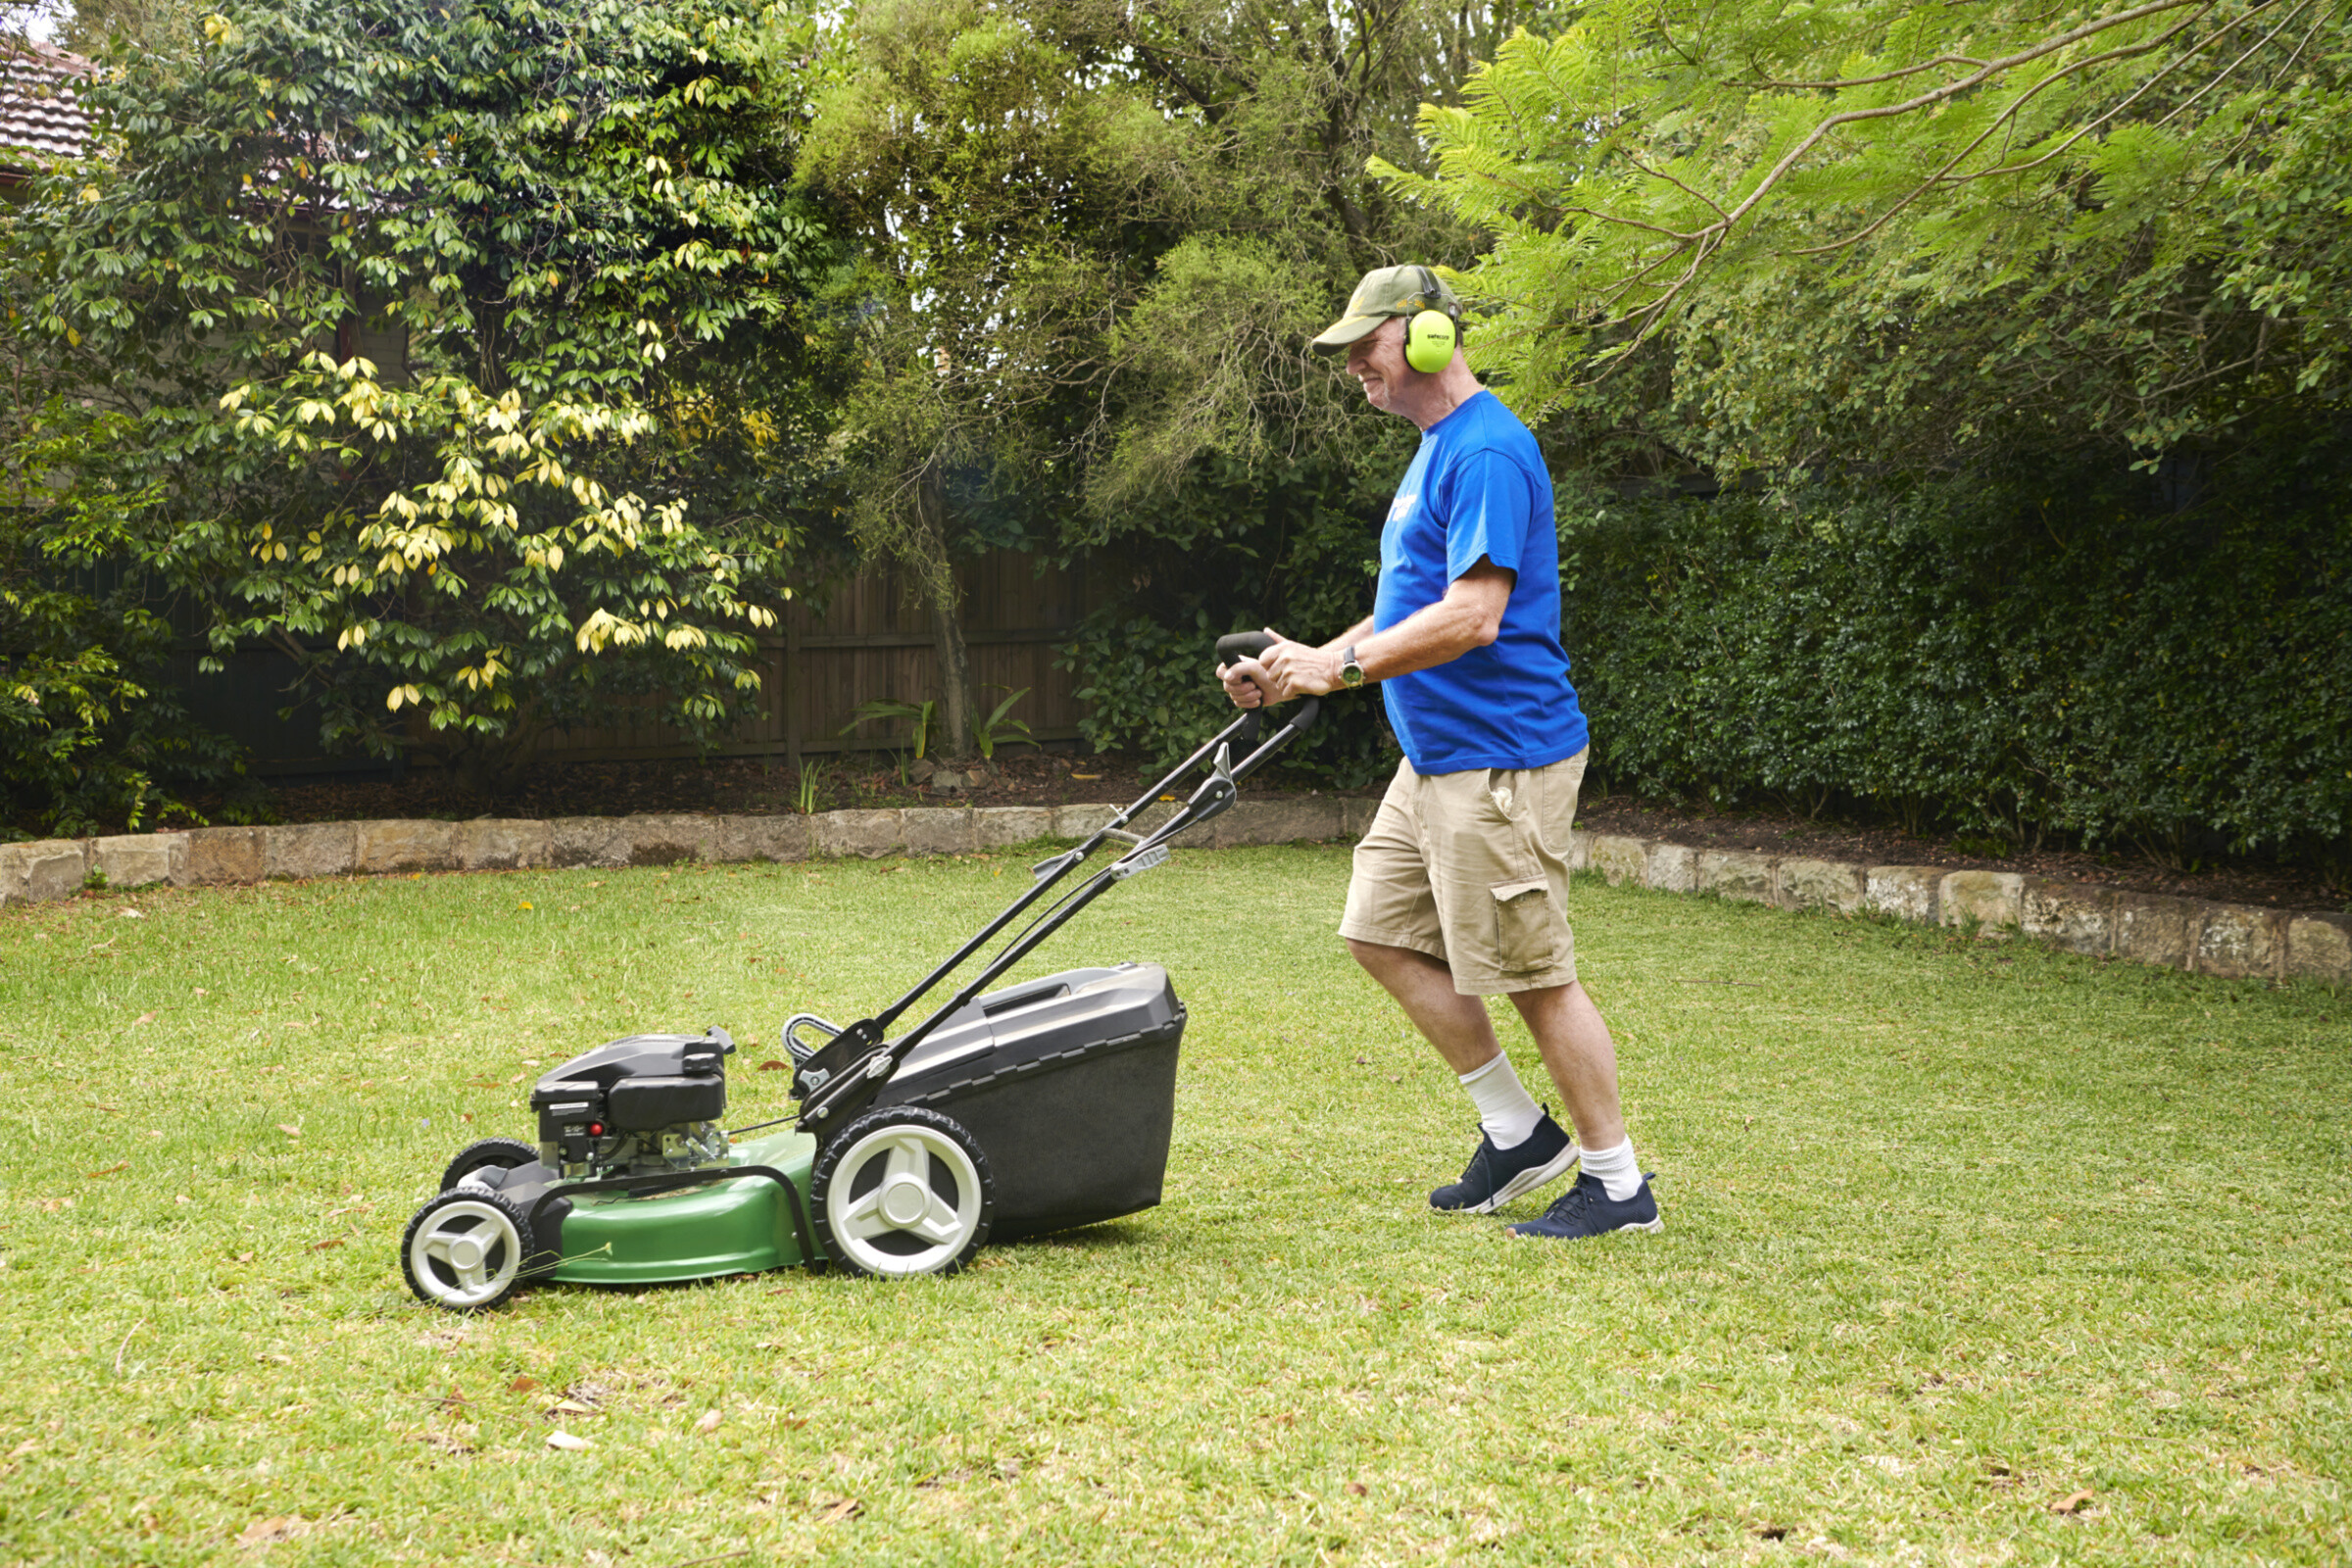 A professional lawn mower parked on a green lawn, ready to be used for cutting grass.